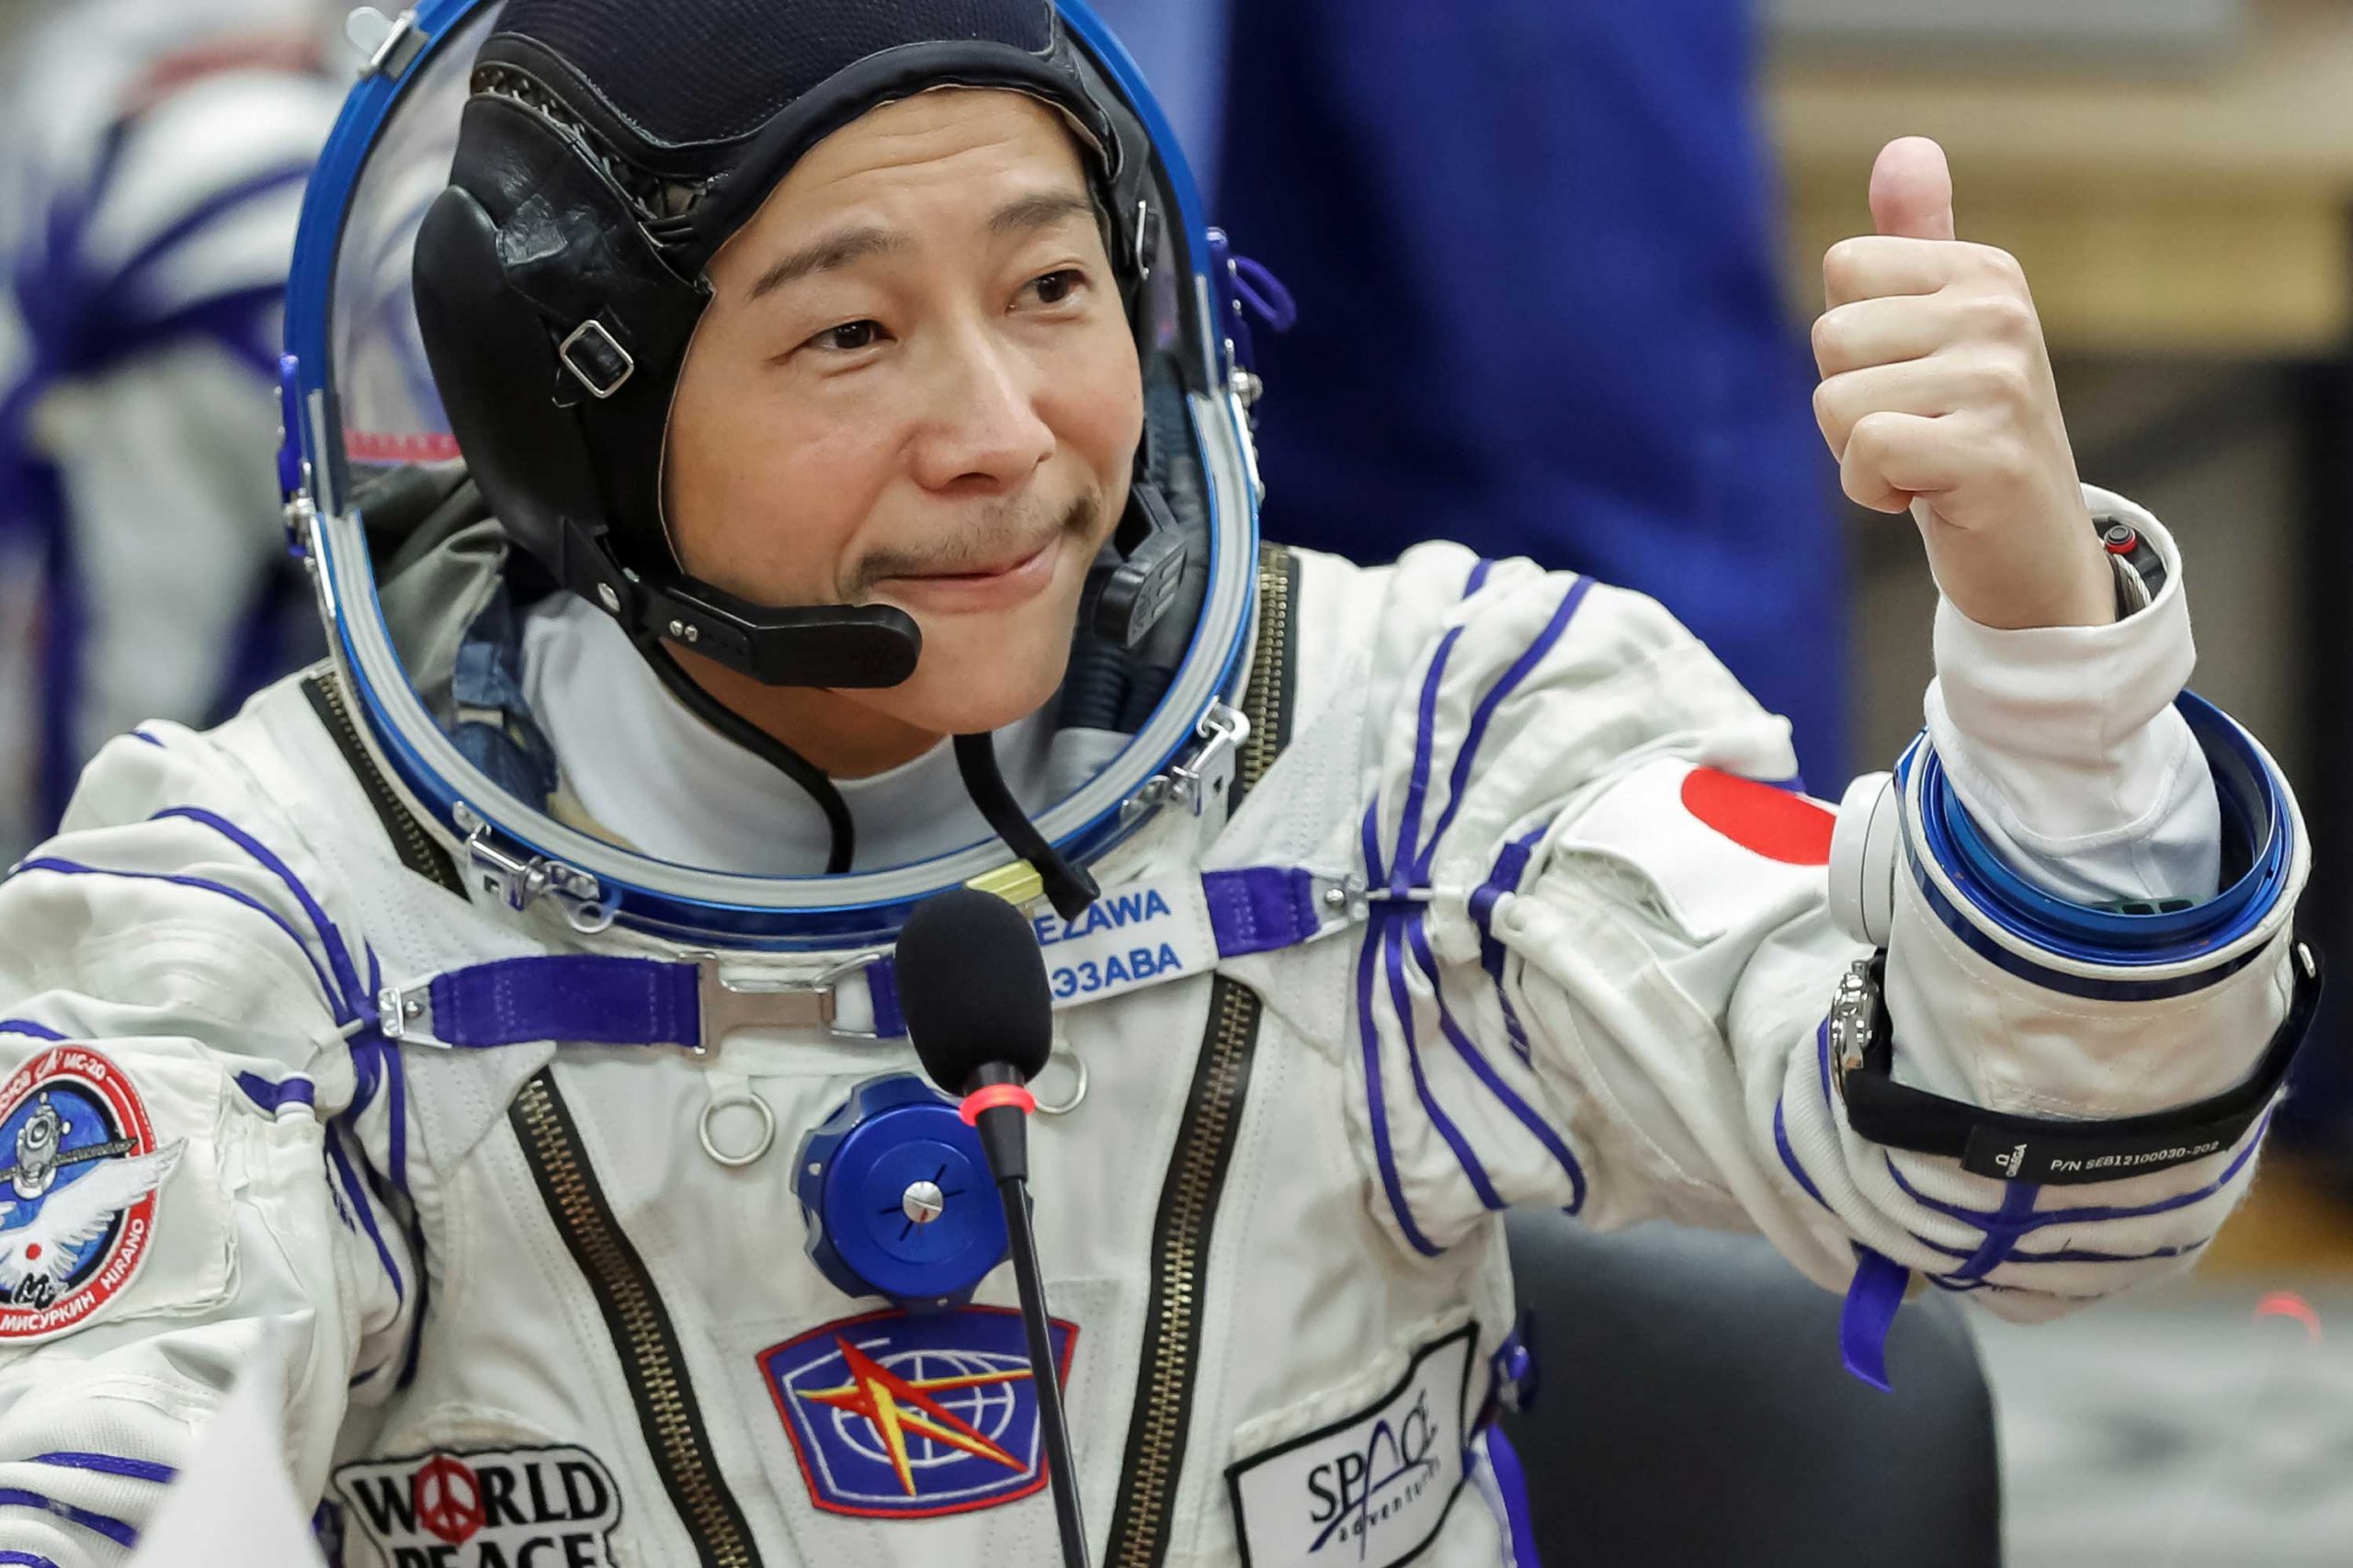 Japanese entrepreneur Yusaku Maezawa shortly before the launch to the International Space Station (ISS) at the Baikonur Cosmodrome, Kazakhstan, December 8, 2021. Clearly visible here strapped to his left arm over his suit, the Speedmaster on a velcro strap. And! Peeking from under his left cuff the UNMISTAKABLE silhouette of Richard Mille's tonneau case